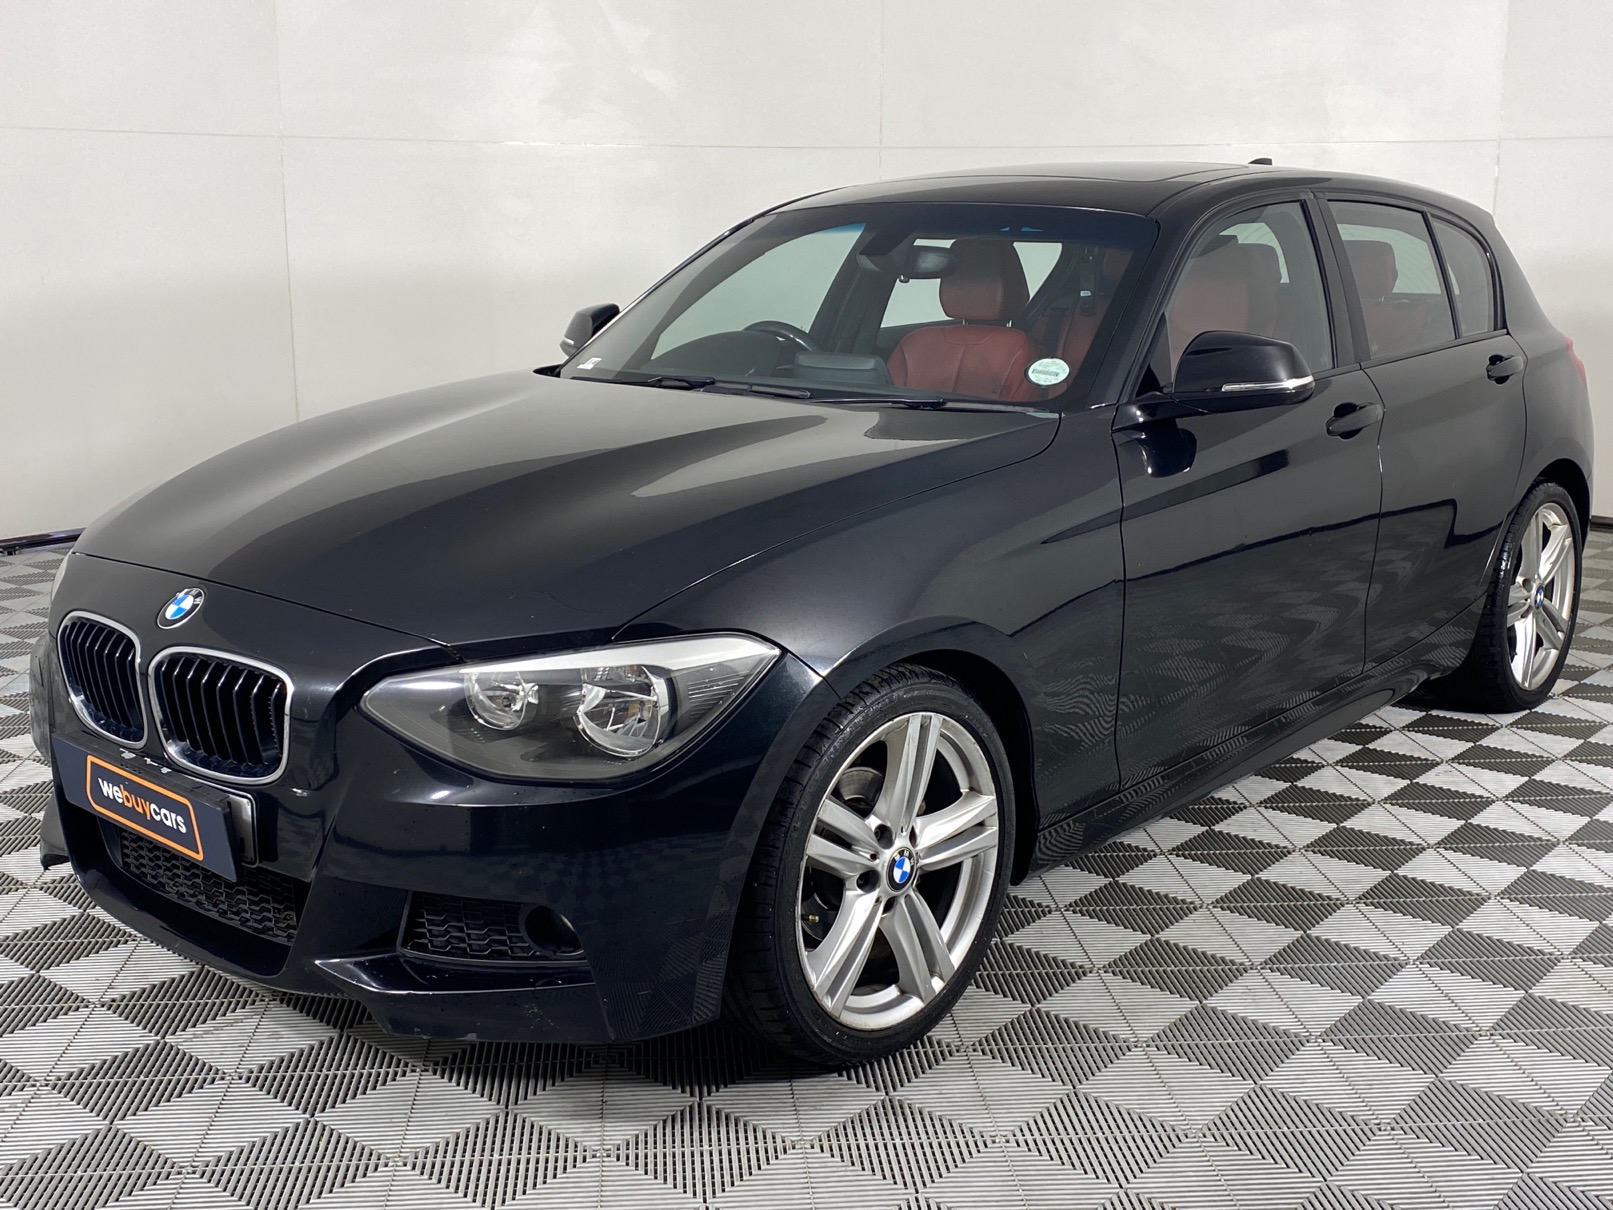 Used 2012 BMW 1 Series 116i 5Door (F20) for sale WeBuyCars